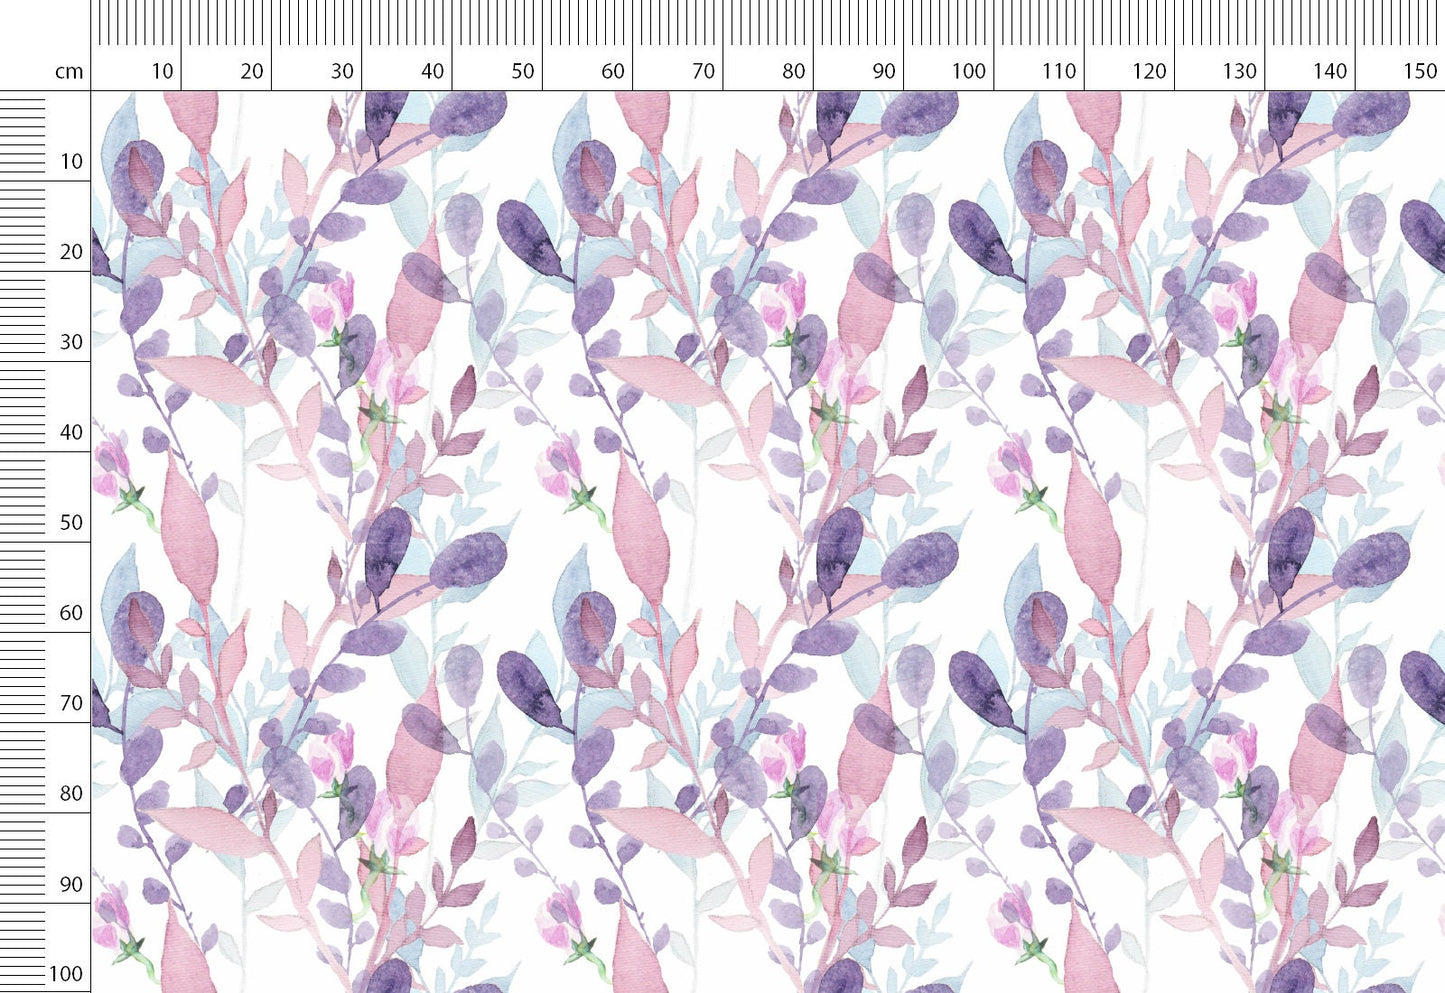 Printed Linen Fabric By The Yard Natural Floral Linen Fabric By The Yard For Clothing & Home Textile - Width 148 cm/1.62yd